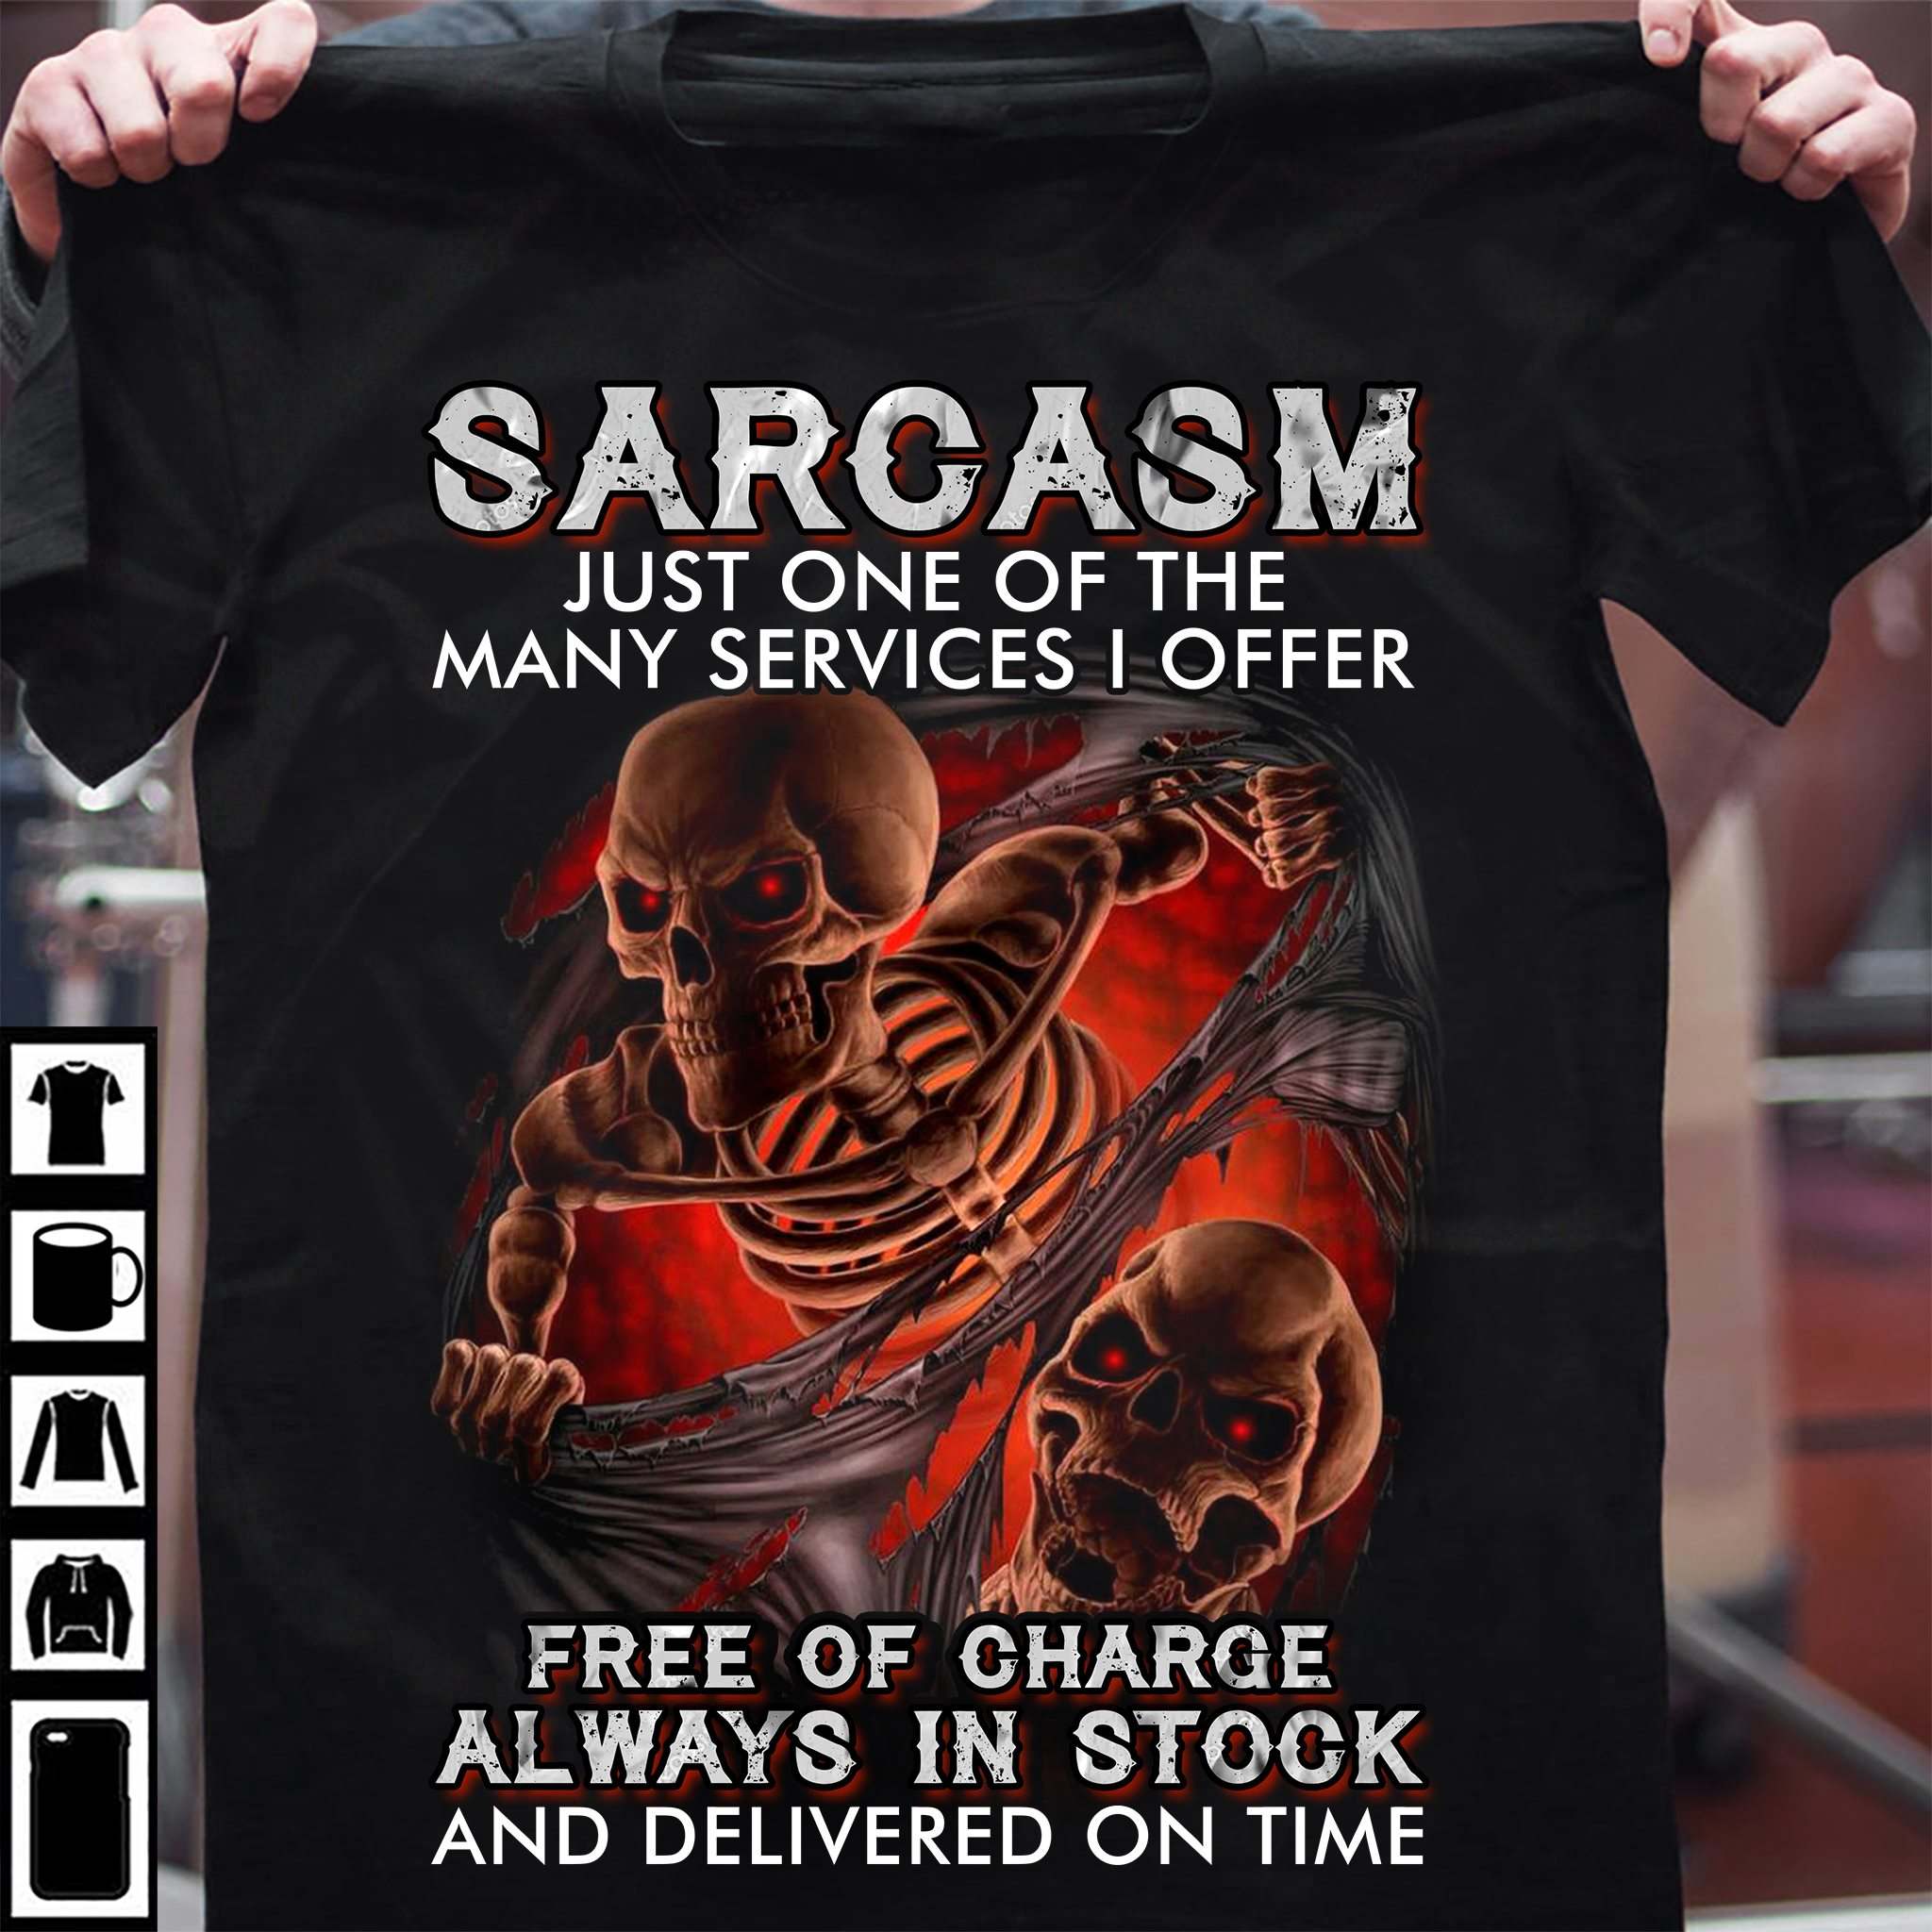 Sarcasm just one of the many services I offer free of charge always in stock - Evil skull